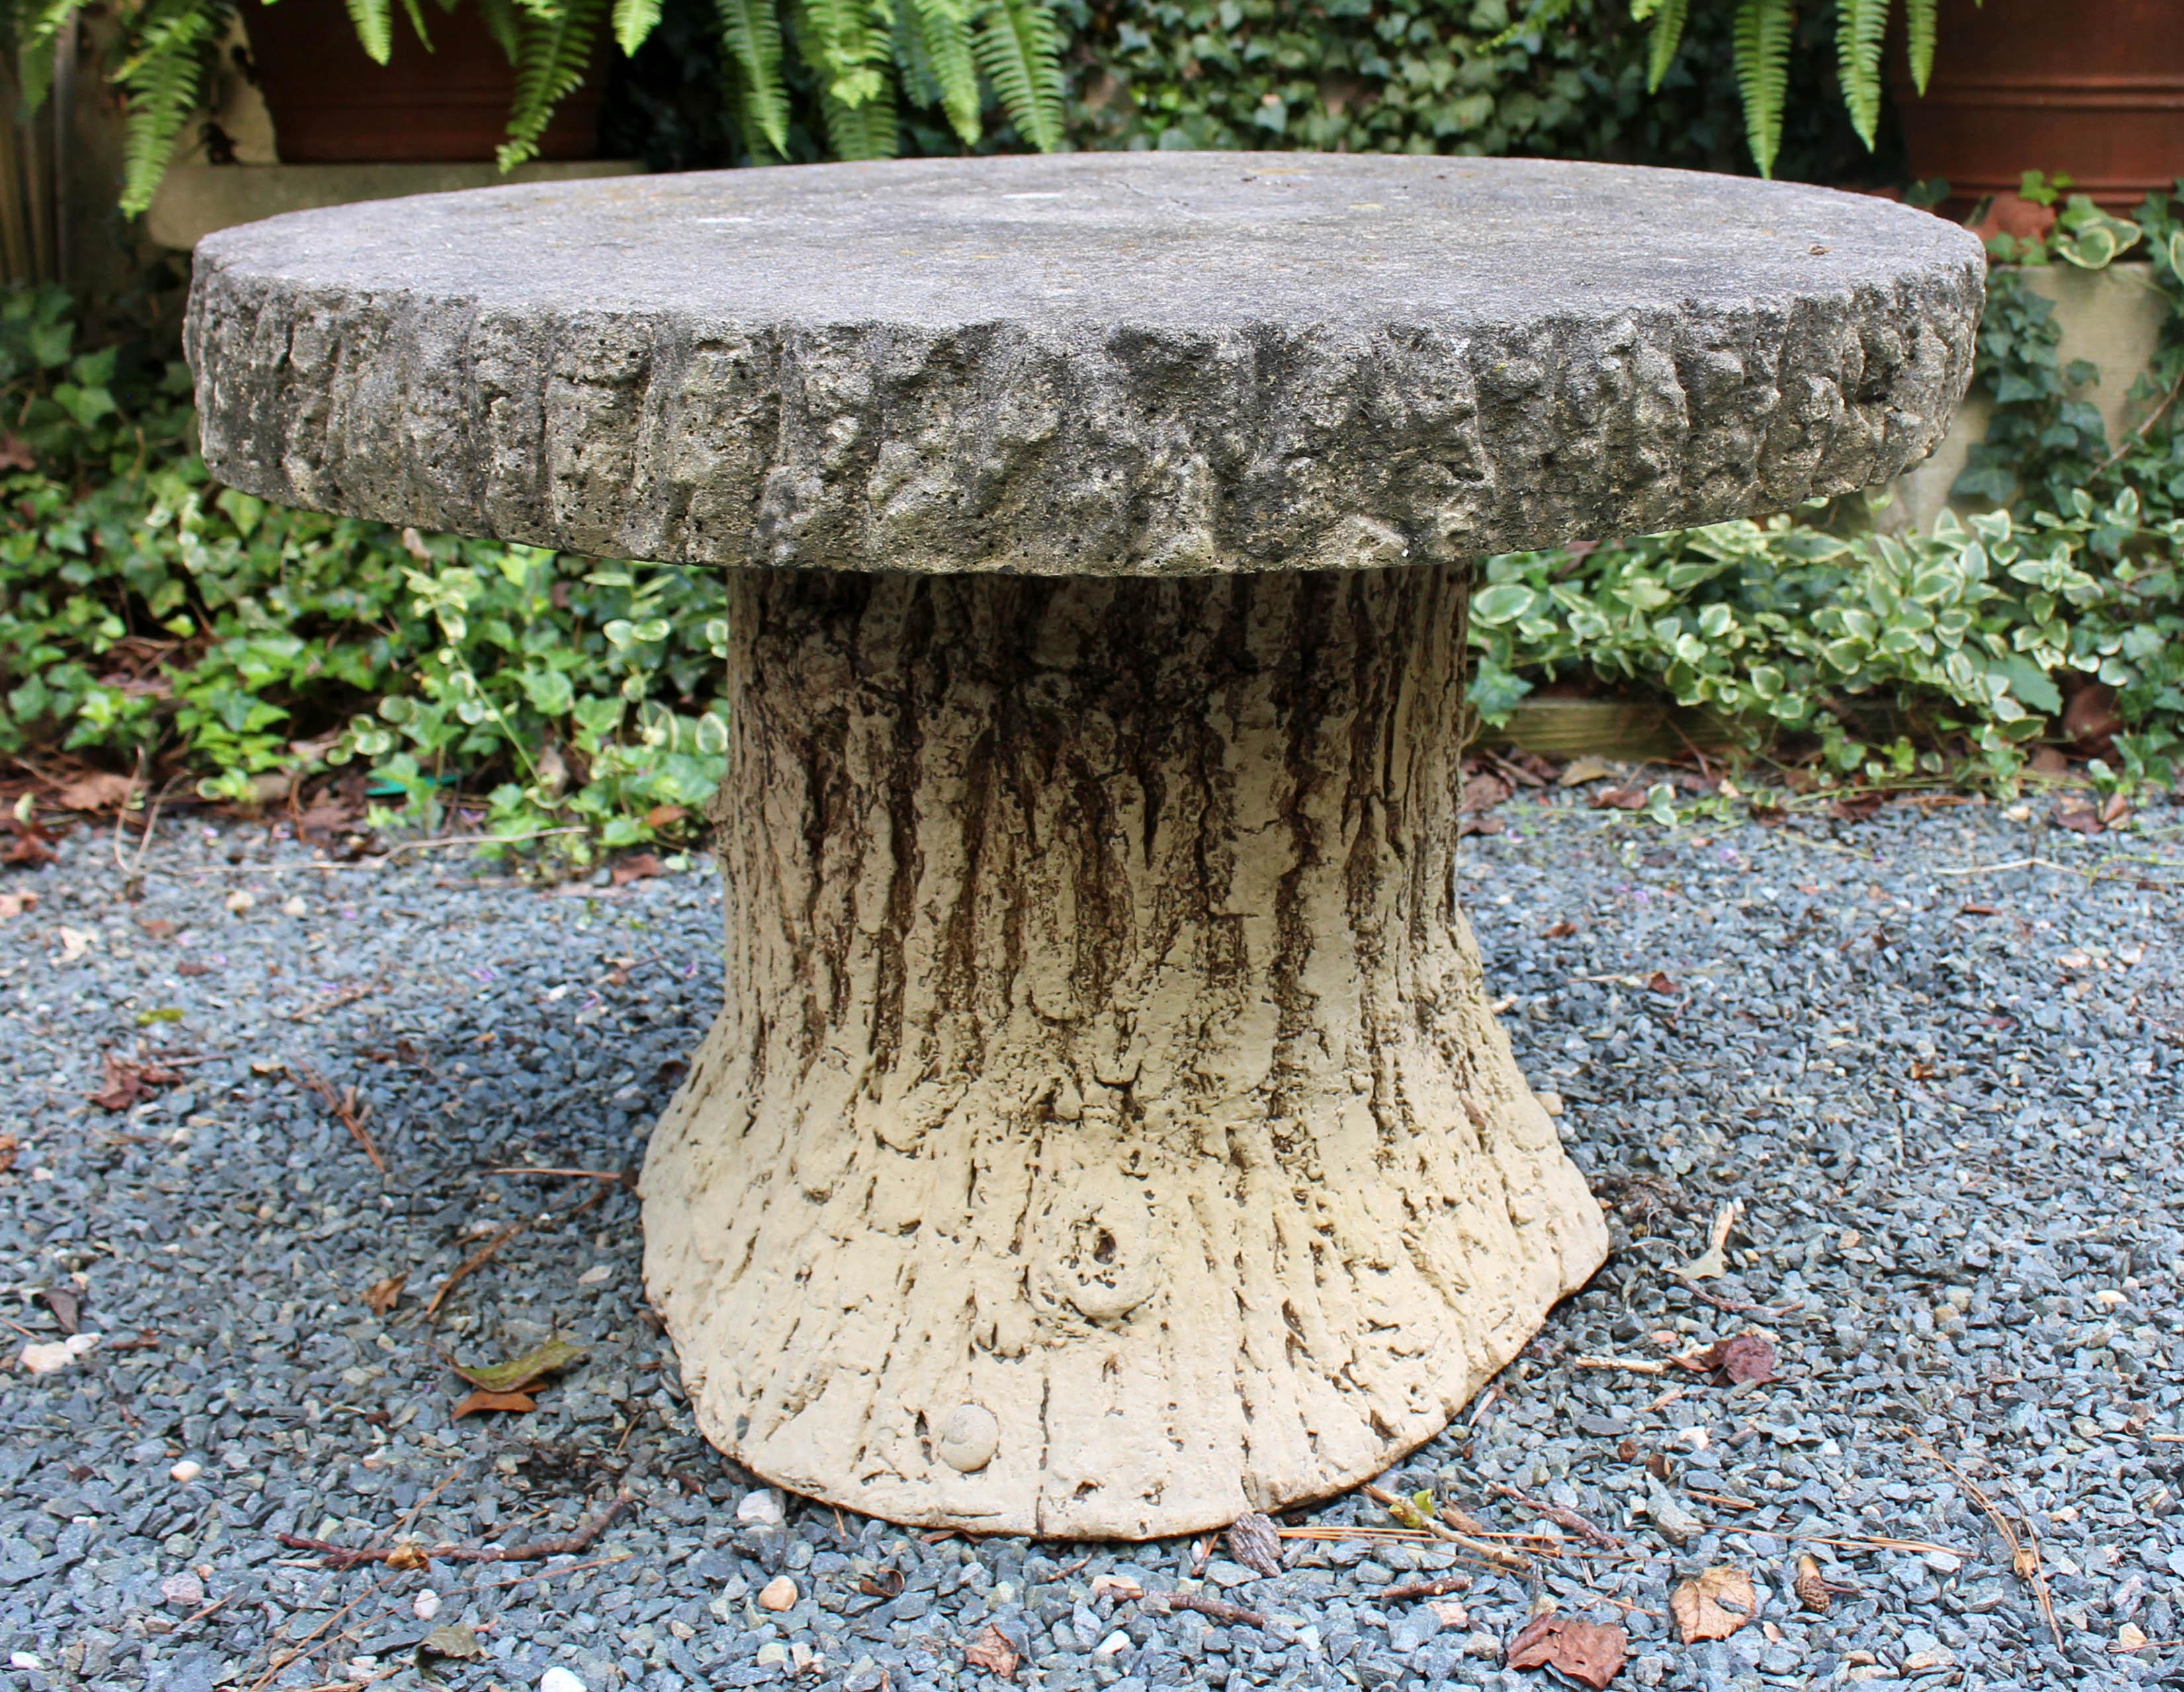 Cast Bath stone faux bois garden table, early-mid 20th century, English. From the Estate of Katharine Reid, former Director of the Cleveland Museum of Art.
30.5